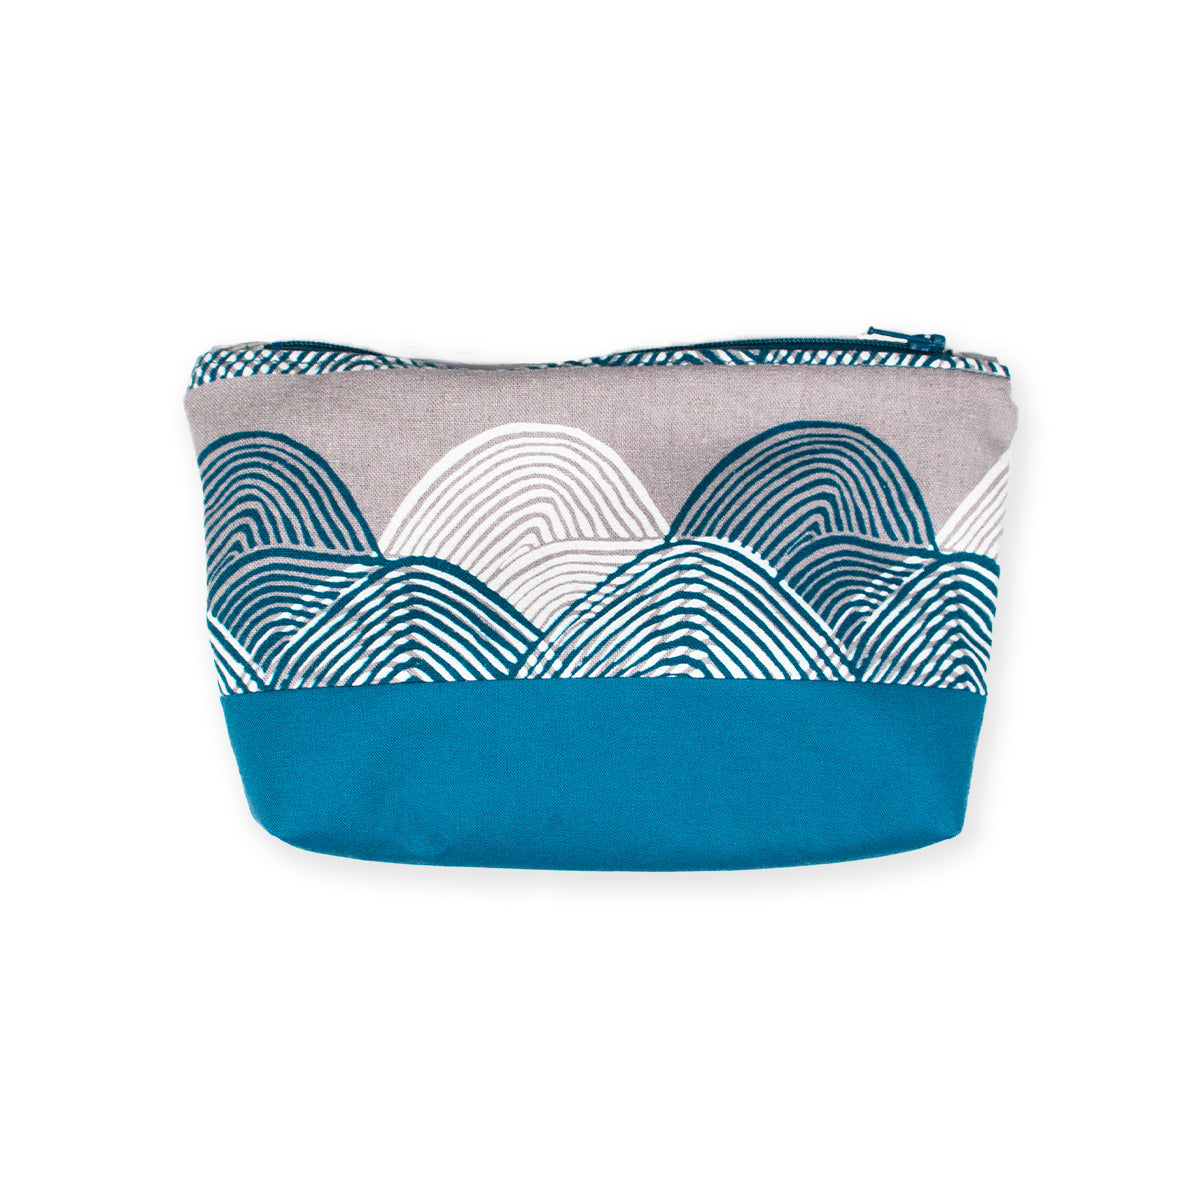 100% cotton zip case featuring abstract line drawing mountains in white and blue